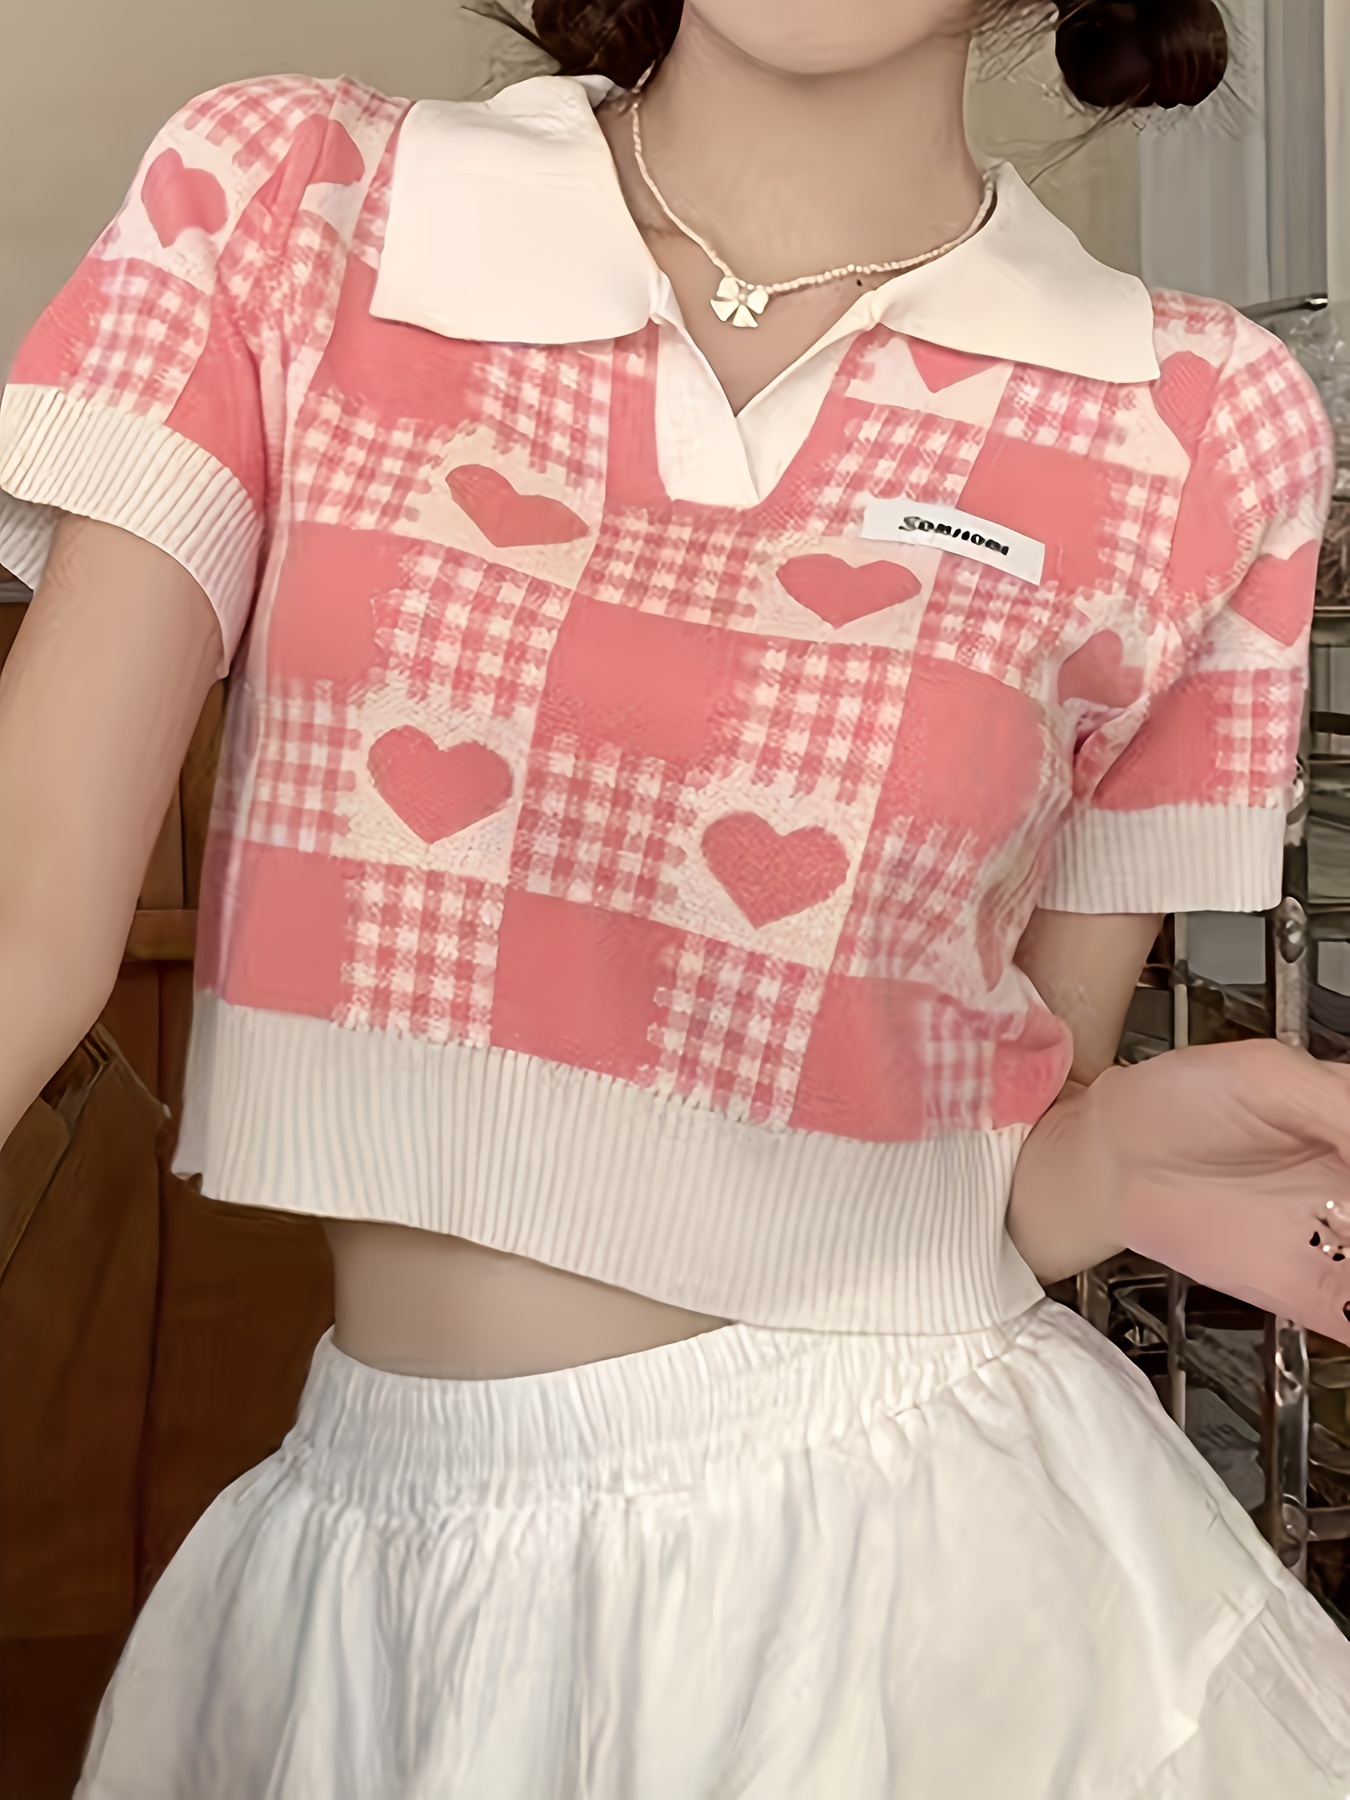 heart crop top in underpinning silk and cotton